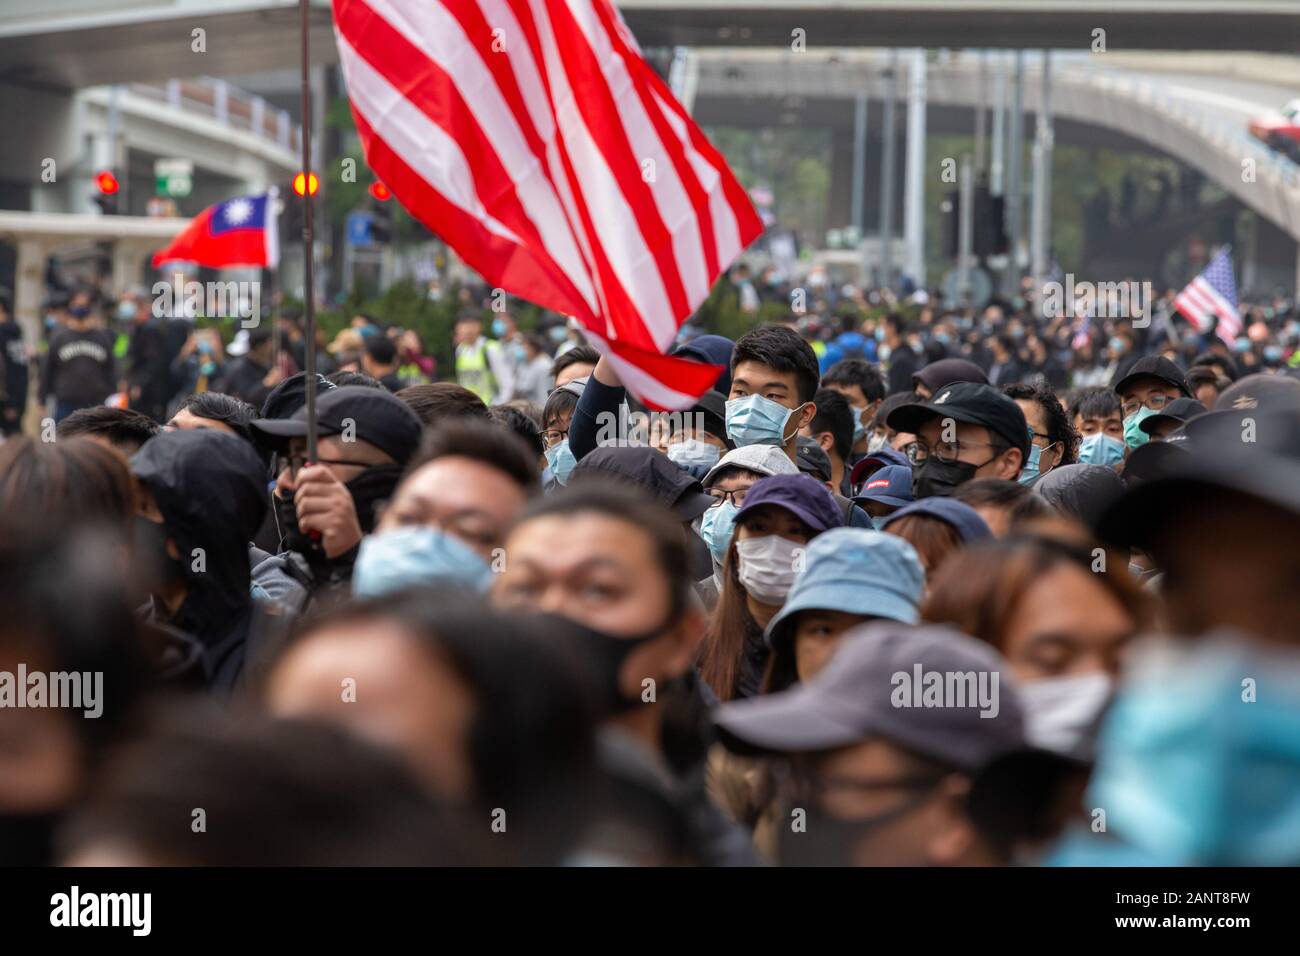 Hong Kong, China. 19th Jan, 2020. Crowd on the move trying to march to Wanchai but the Police stopped them at Admiralty. Hong Kong Protest - Universal Seige on Communists Rally at Chater Garden, Central, Hong Kong. Credit: David Ogg/Alamy Live News Stock Photo